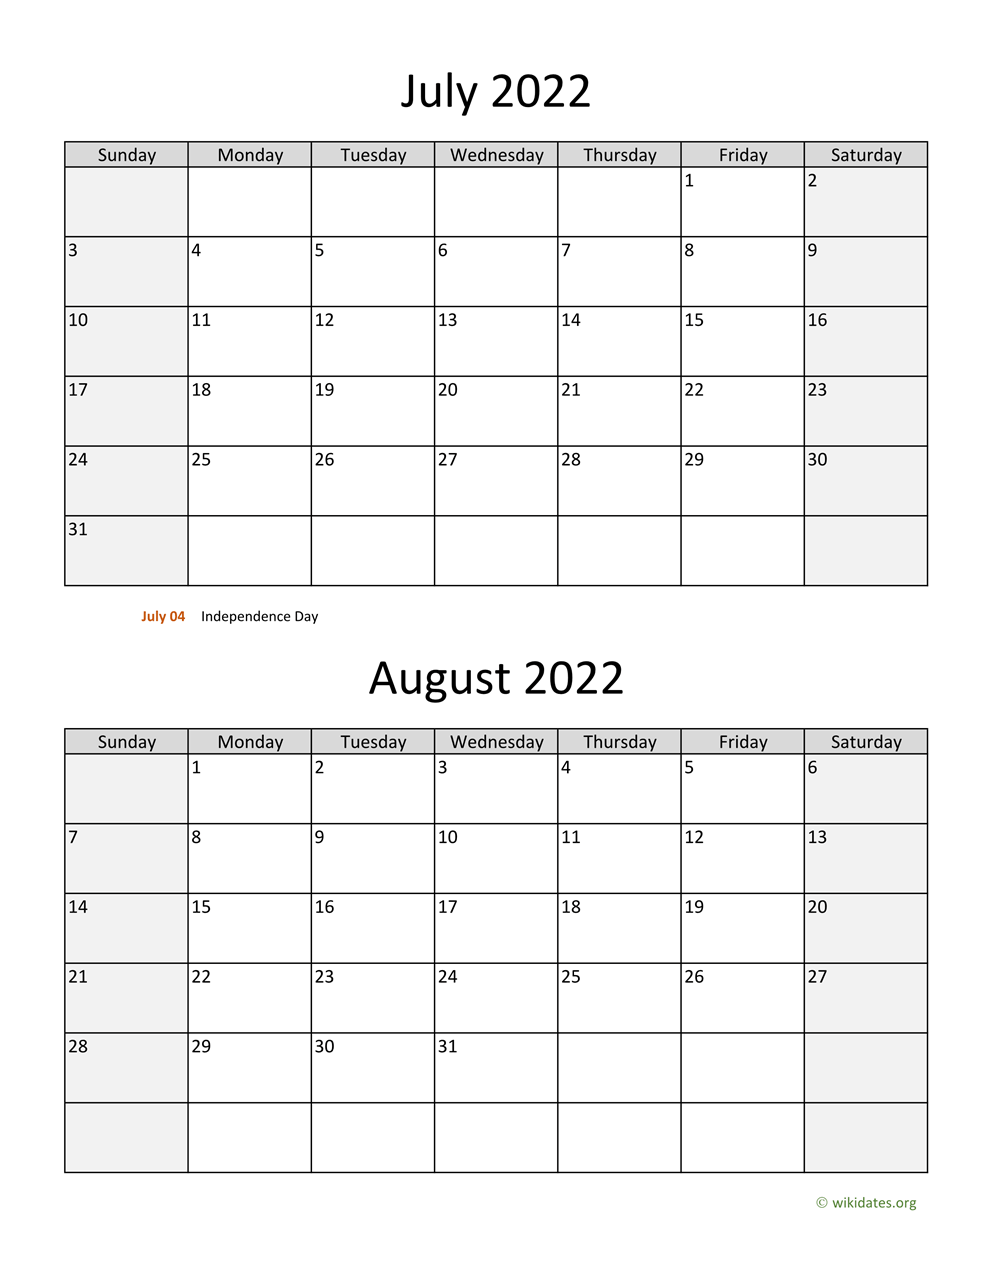 June To August 2022 Calendar July And August 2022 Calendar | Wikidates.org